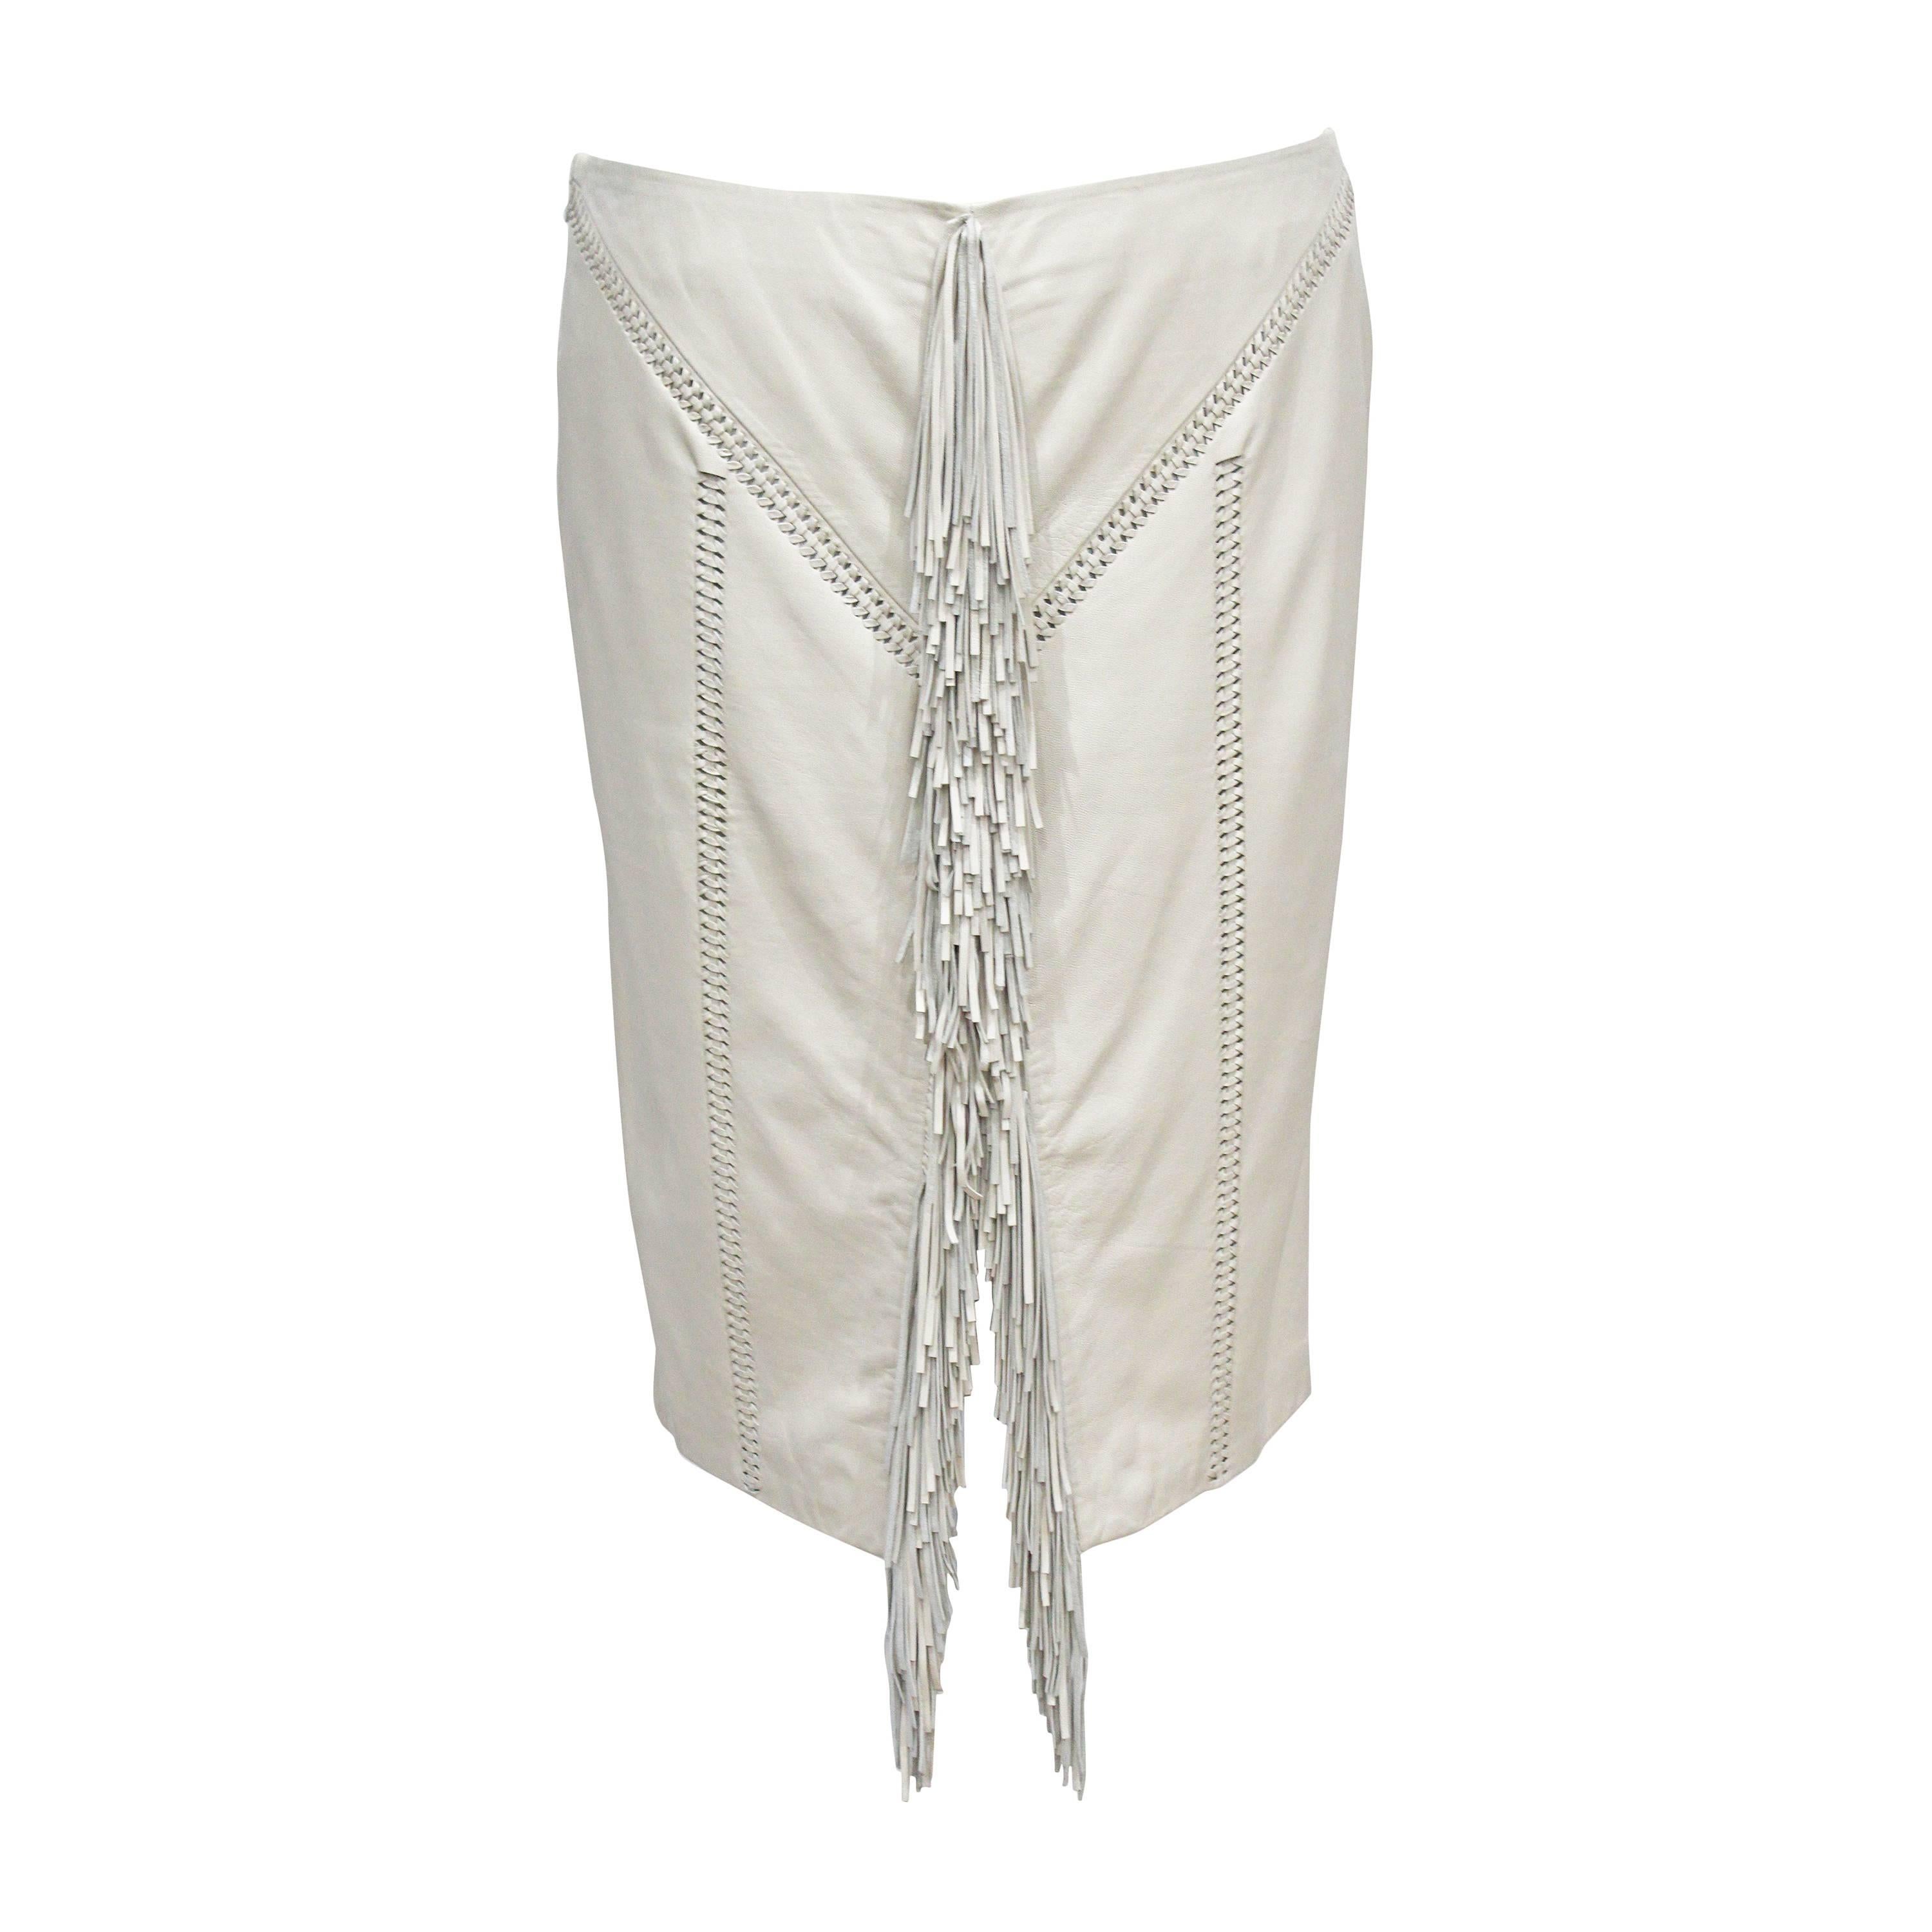 Important Gianni Versace Fringed Leather Pencil Skirt, Fall 1992